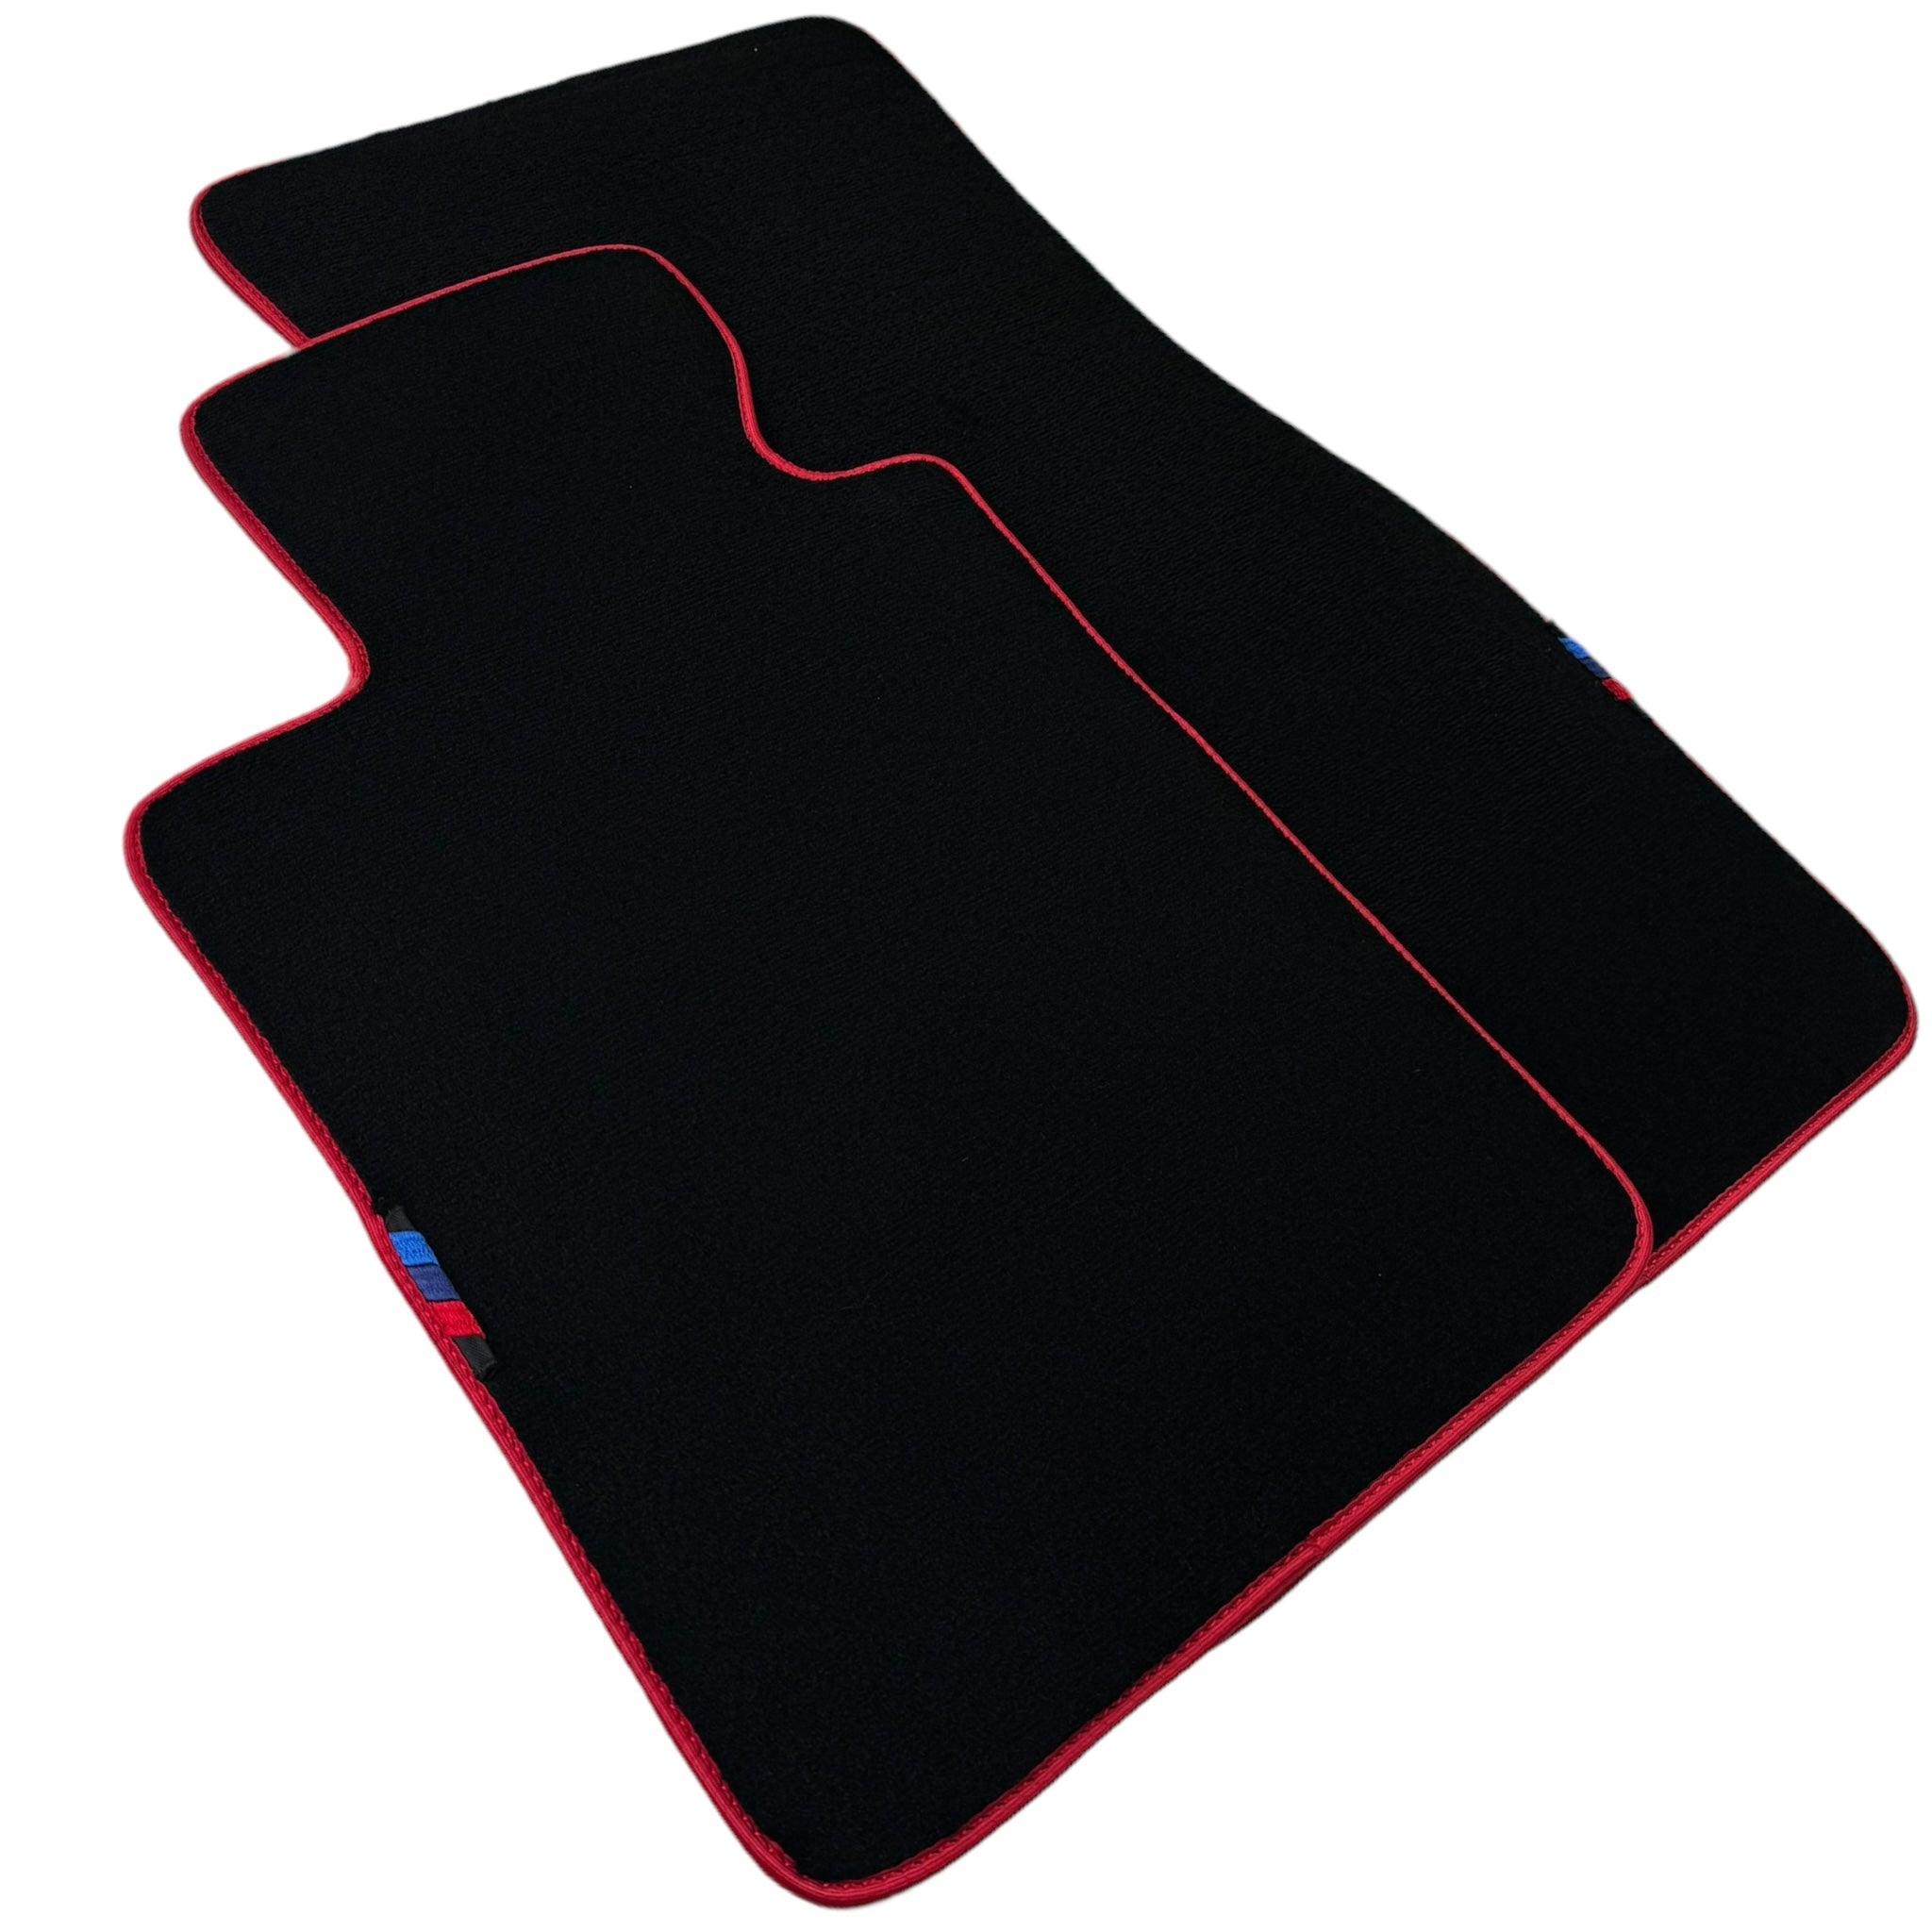 Black Floor Mats For BMW 4 Series G22 Coupe | Red Trim